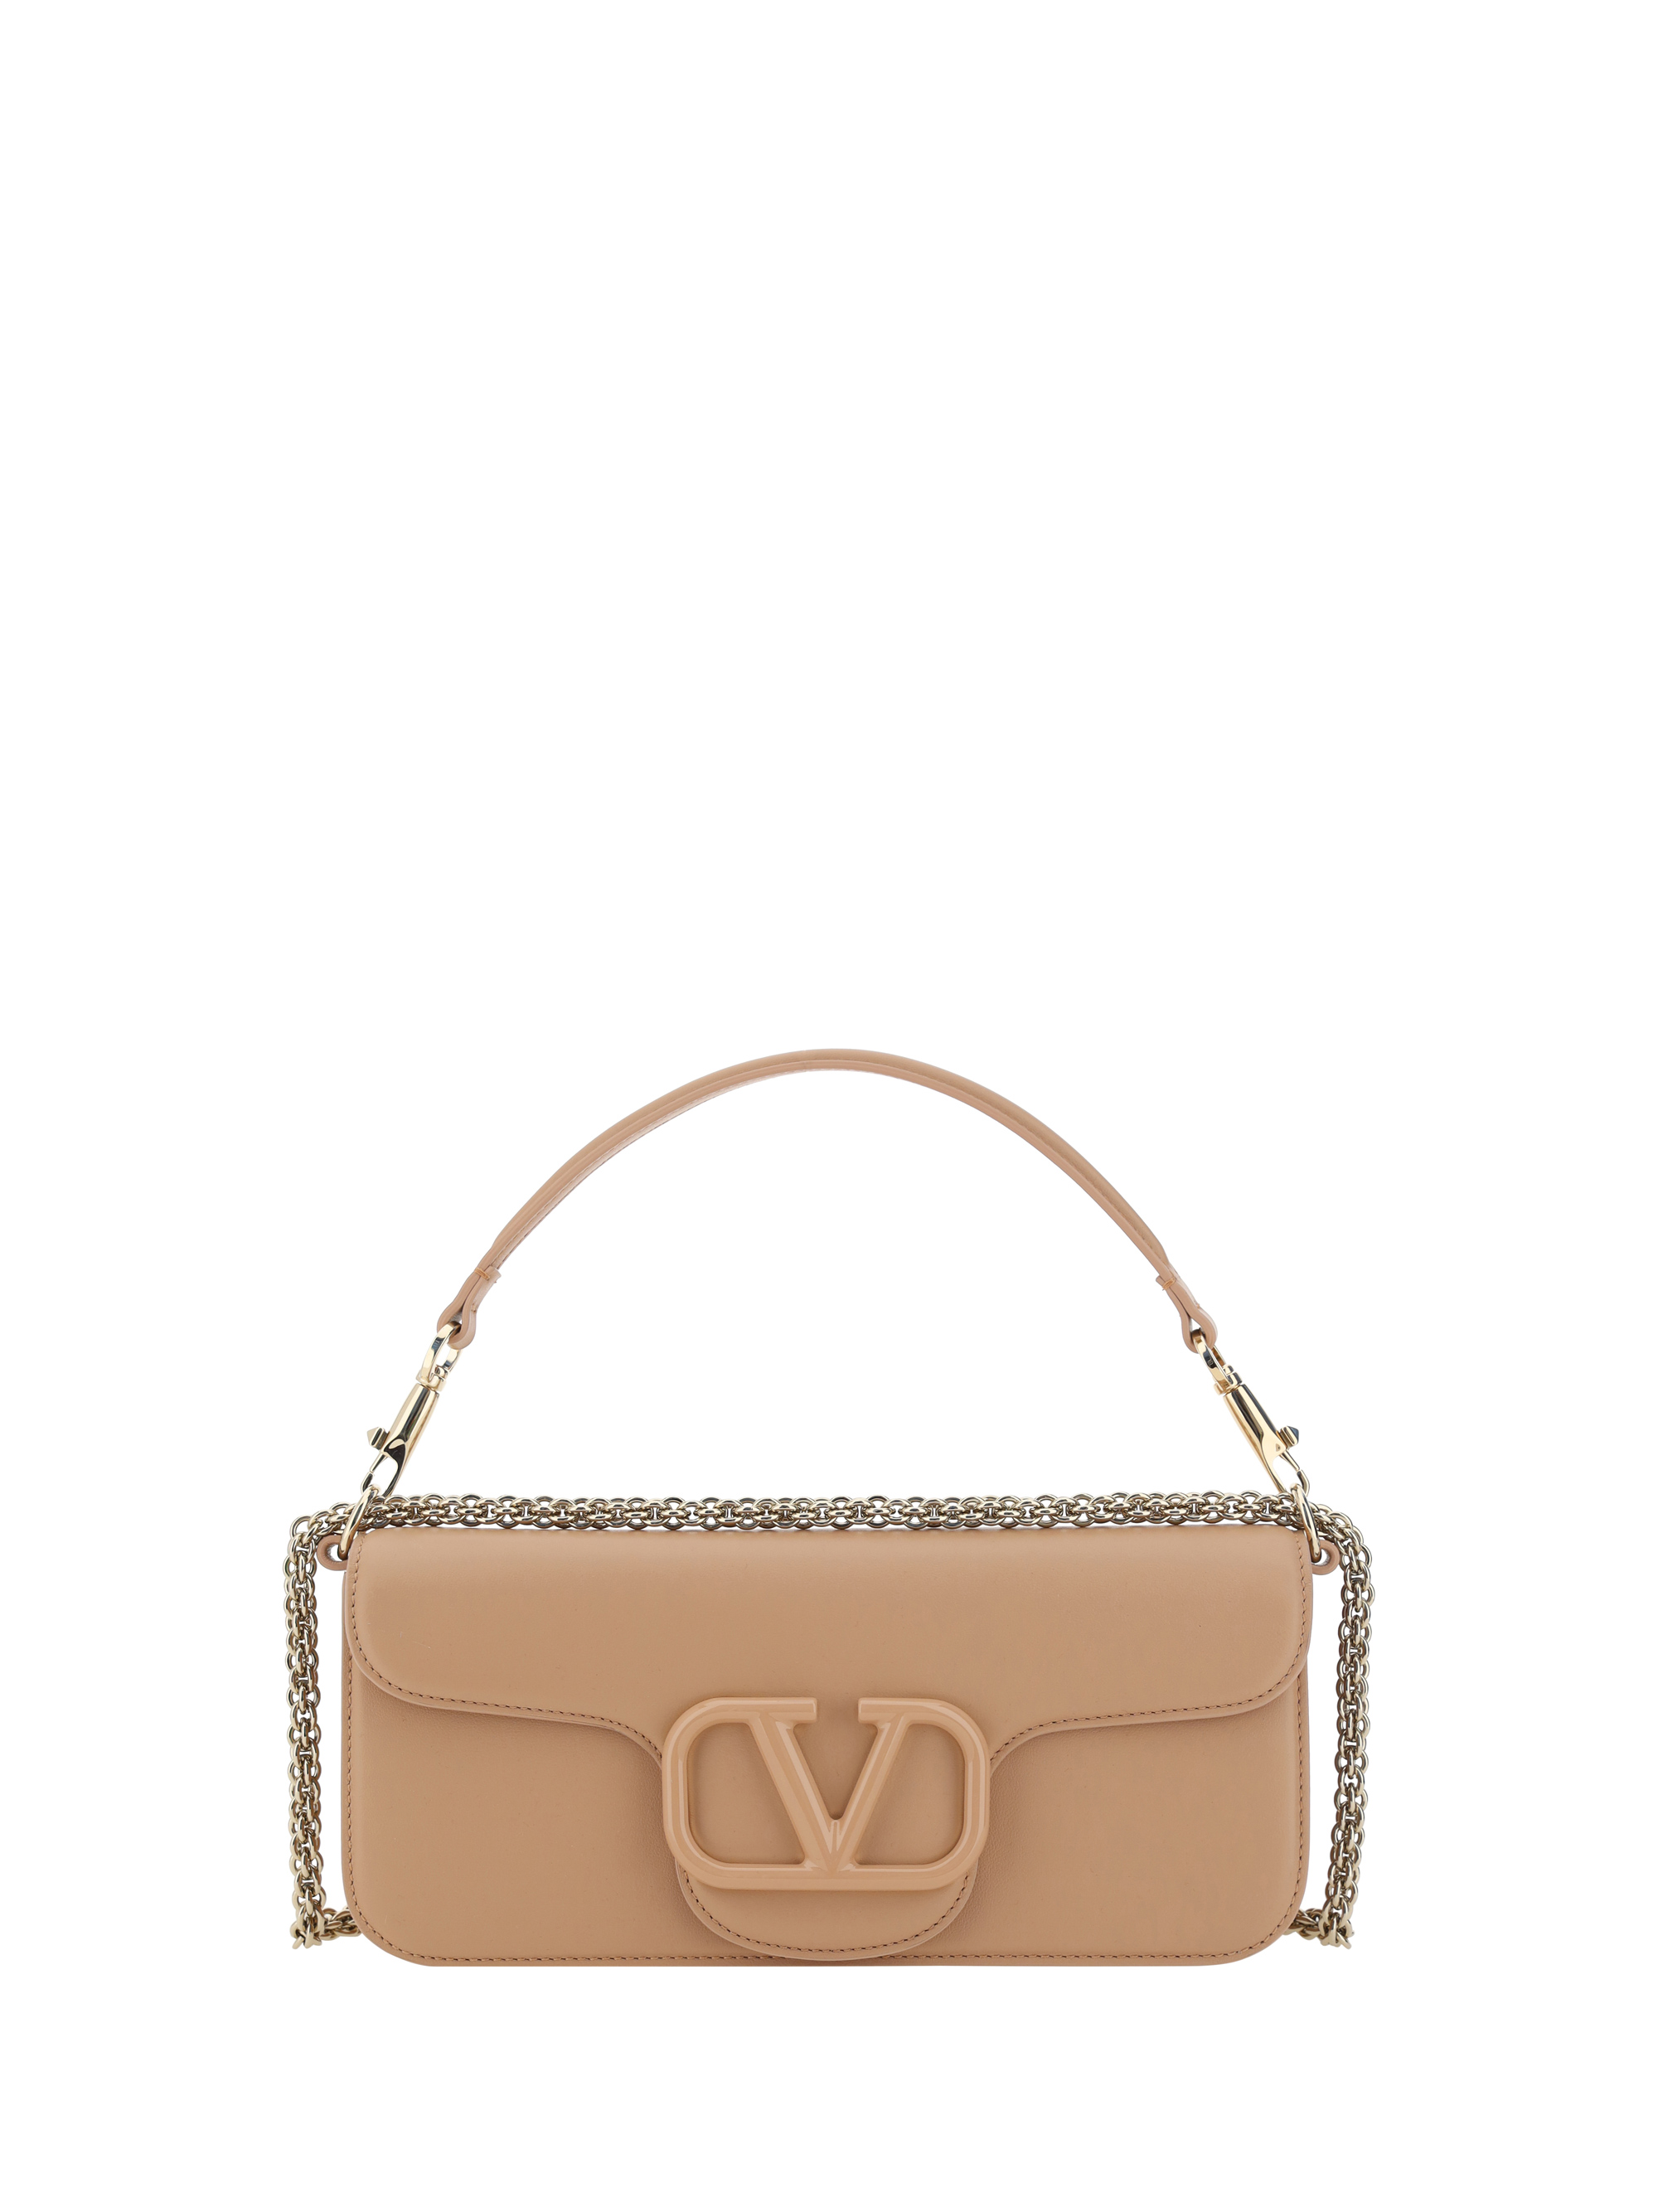 Women's VALENTINO Bags Sale, Up To 70% Off